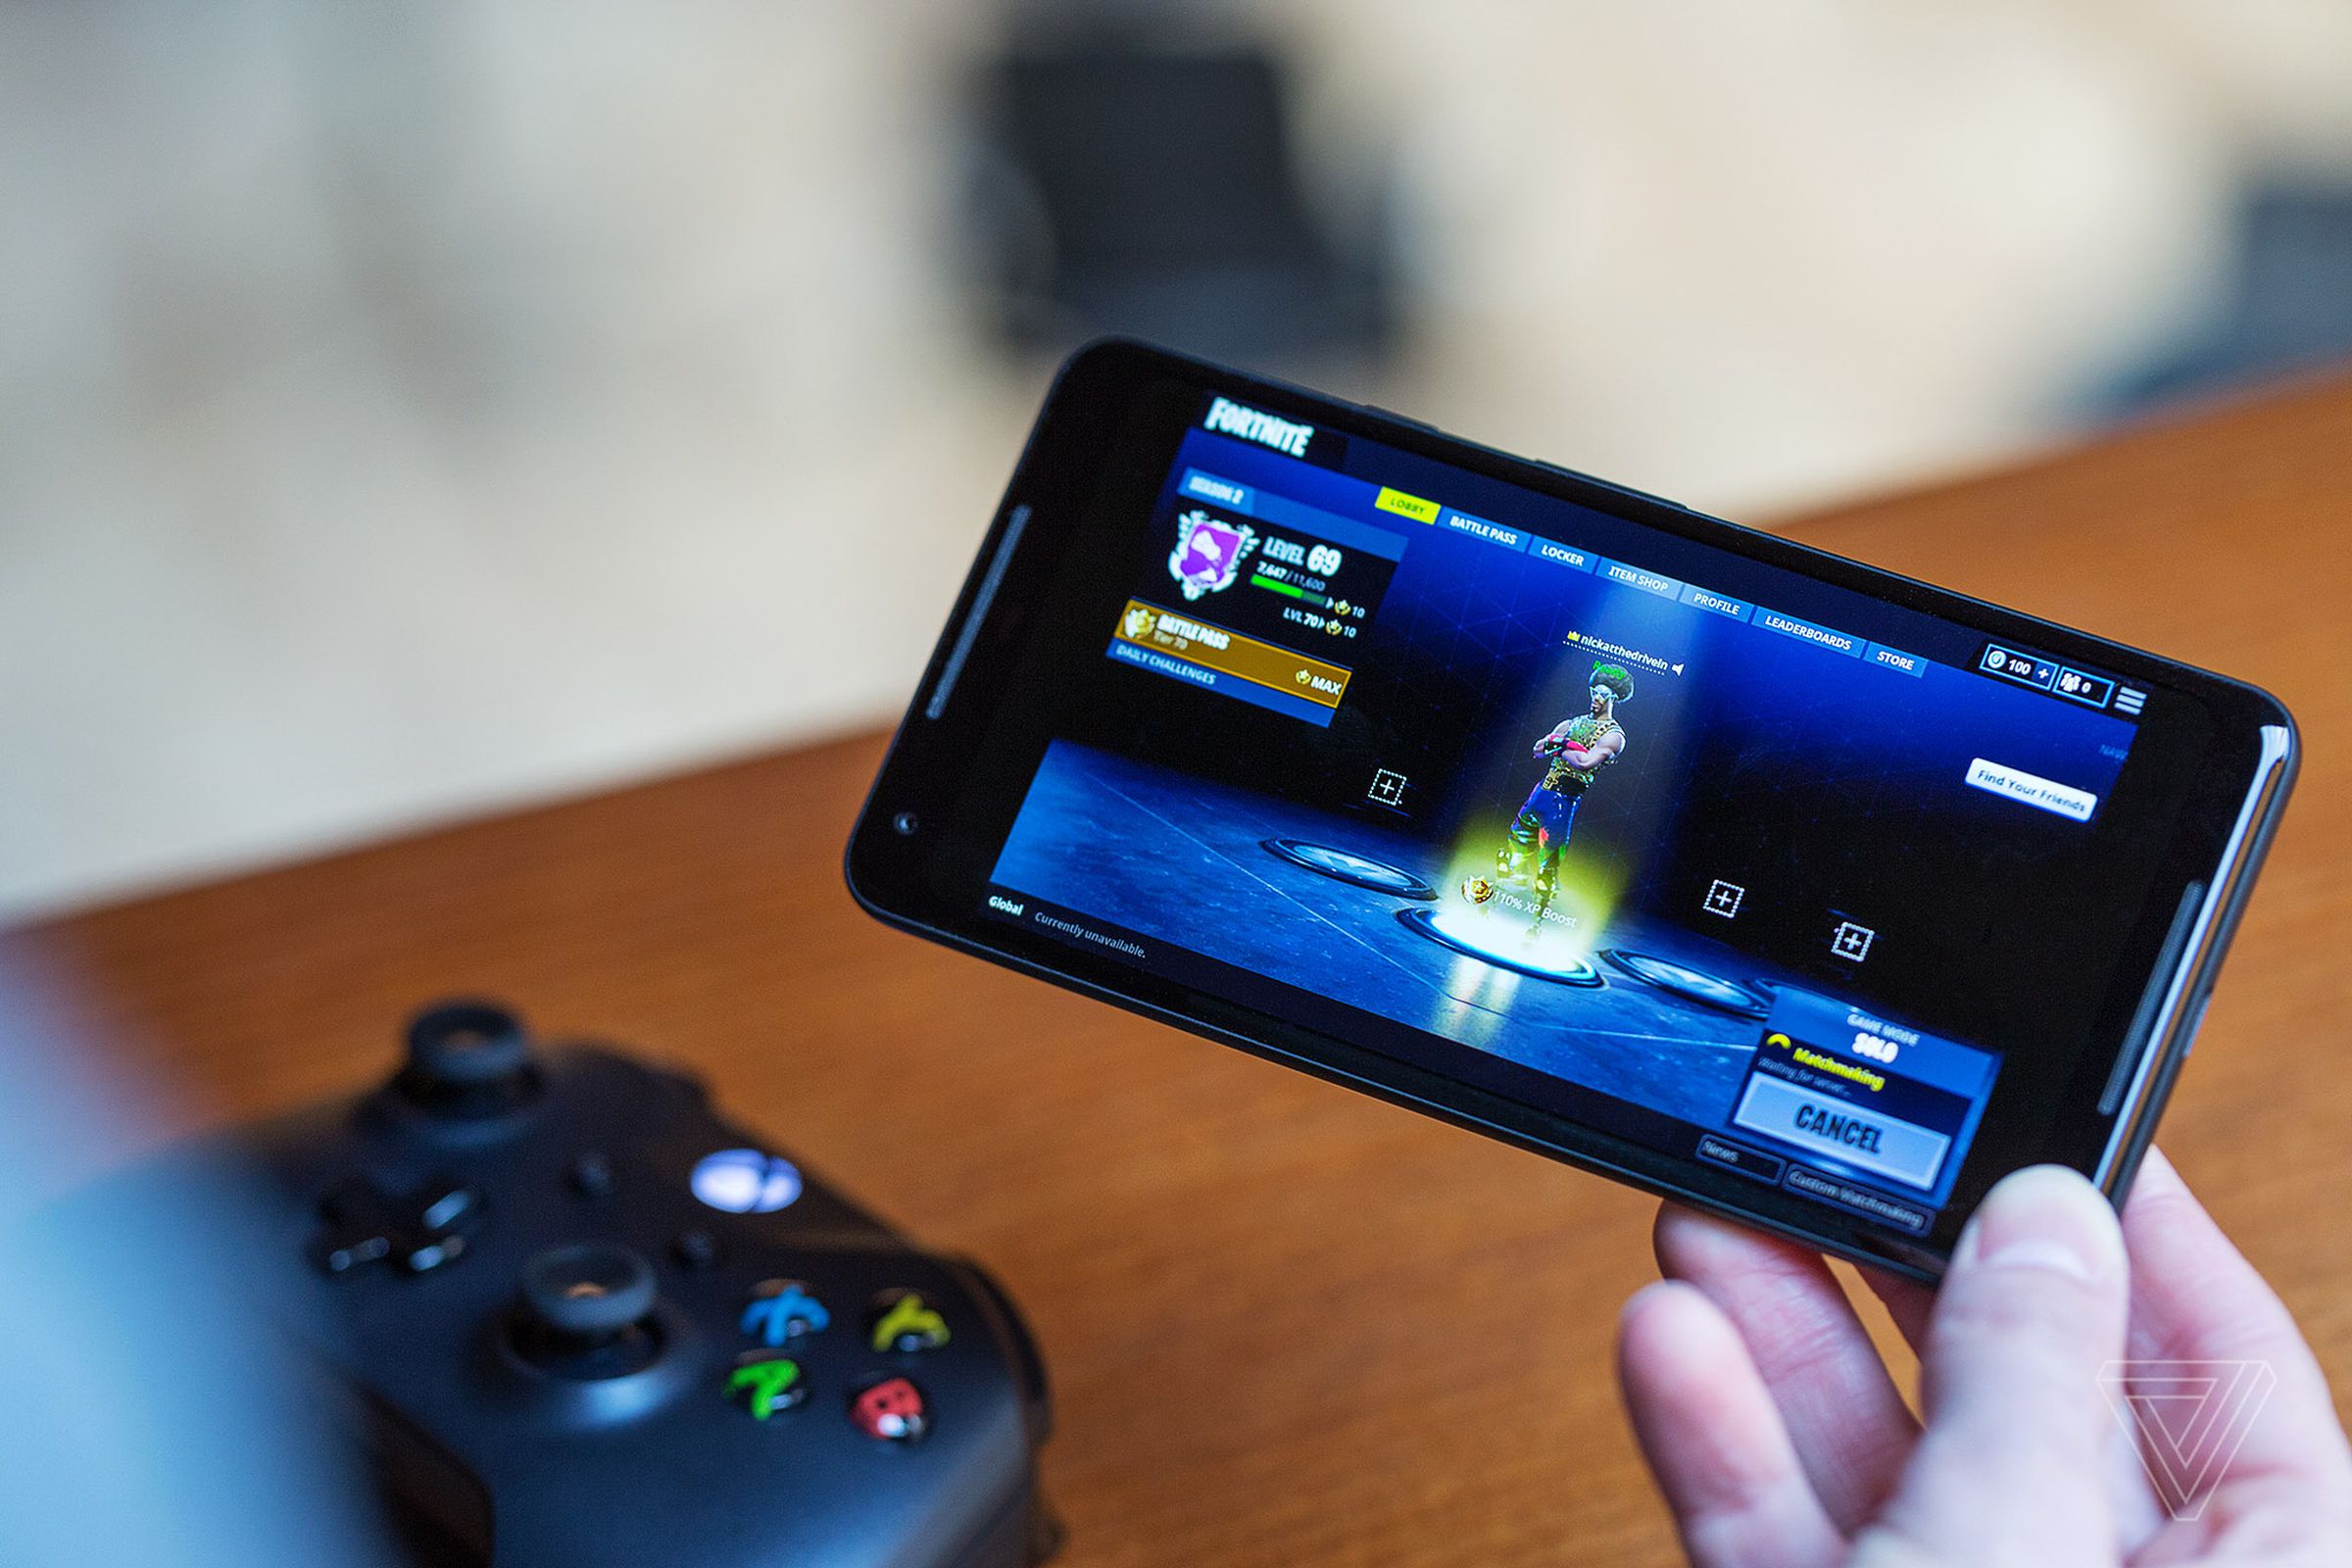 Blade’s Shadow can stream PC games playing on a Windows 10 virtual machine to an Android phone, so you can play games like Fortnite Battle Royale on a Google Pixel 2.